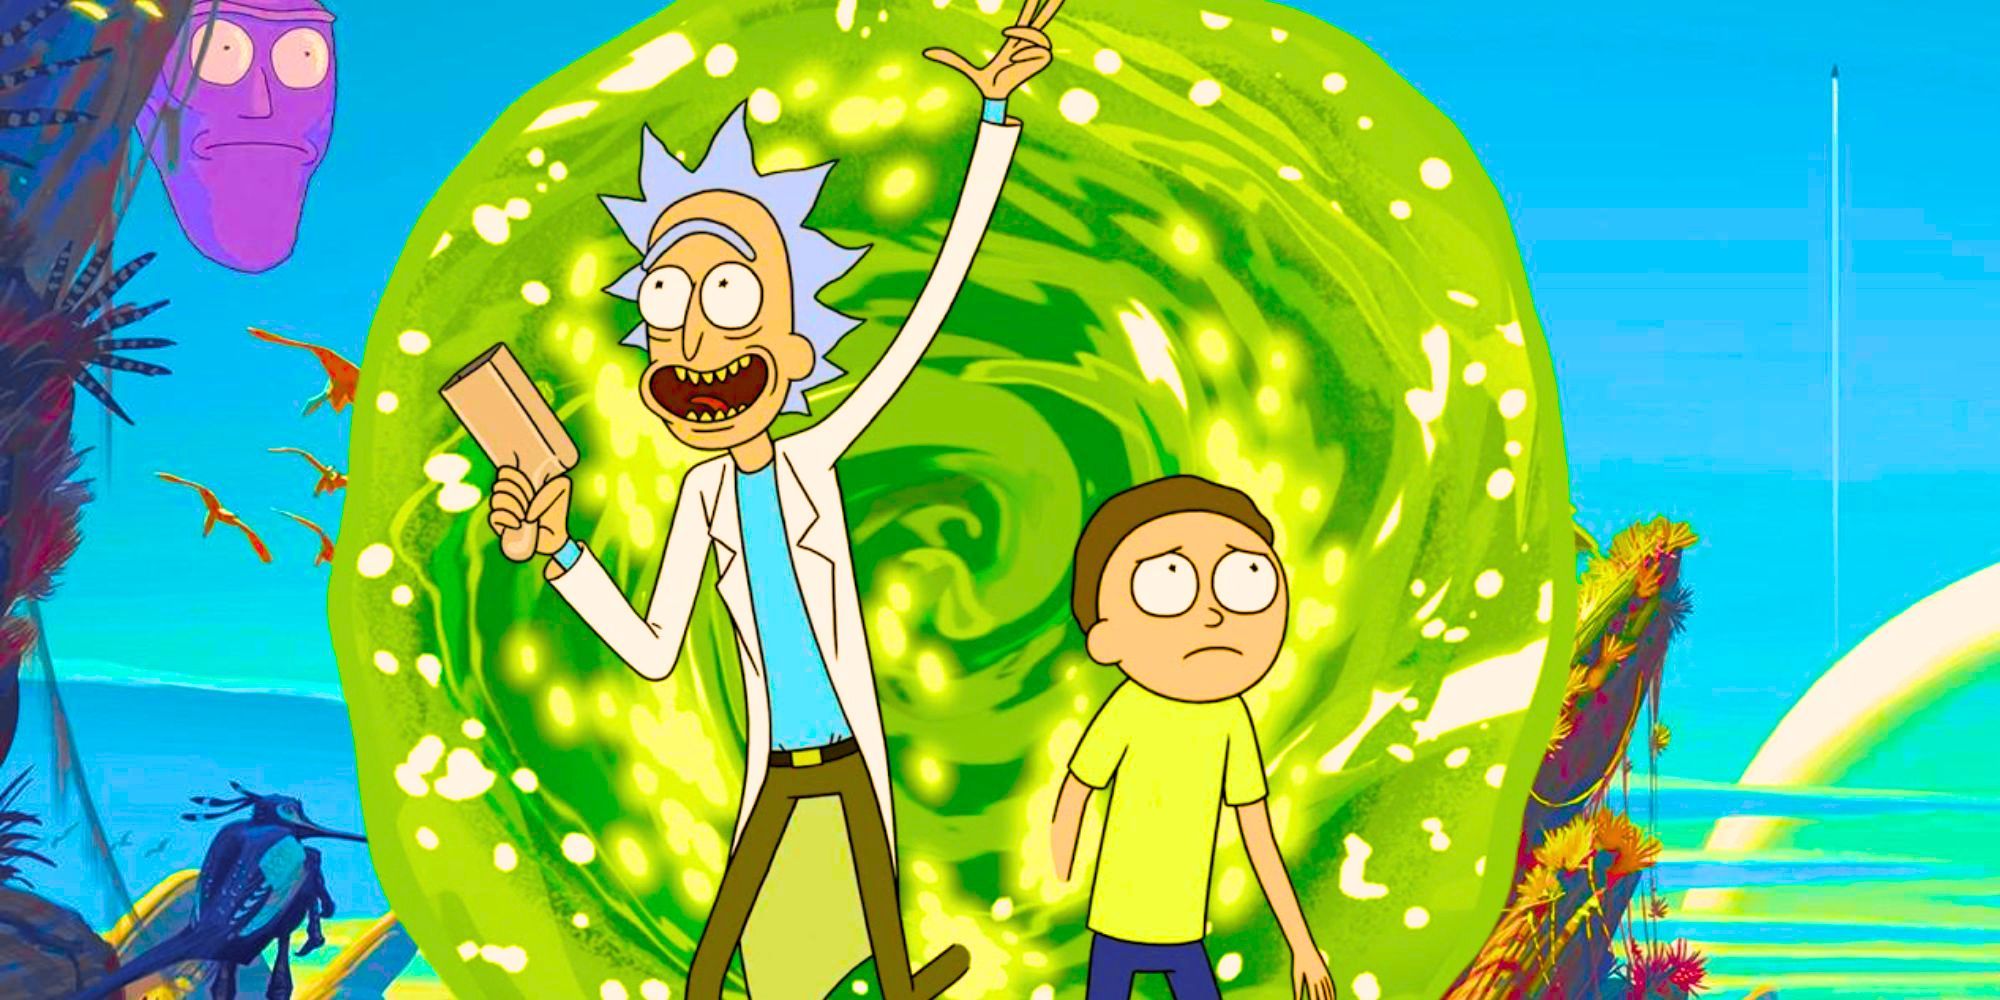 Rick and Morty stepping out of a portal, but Rick is celebrating and Morty looks worried